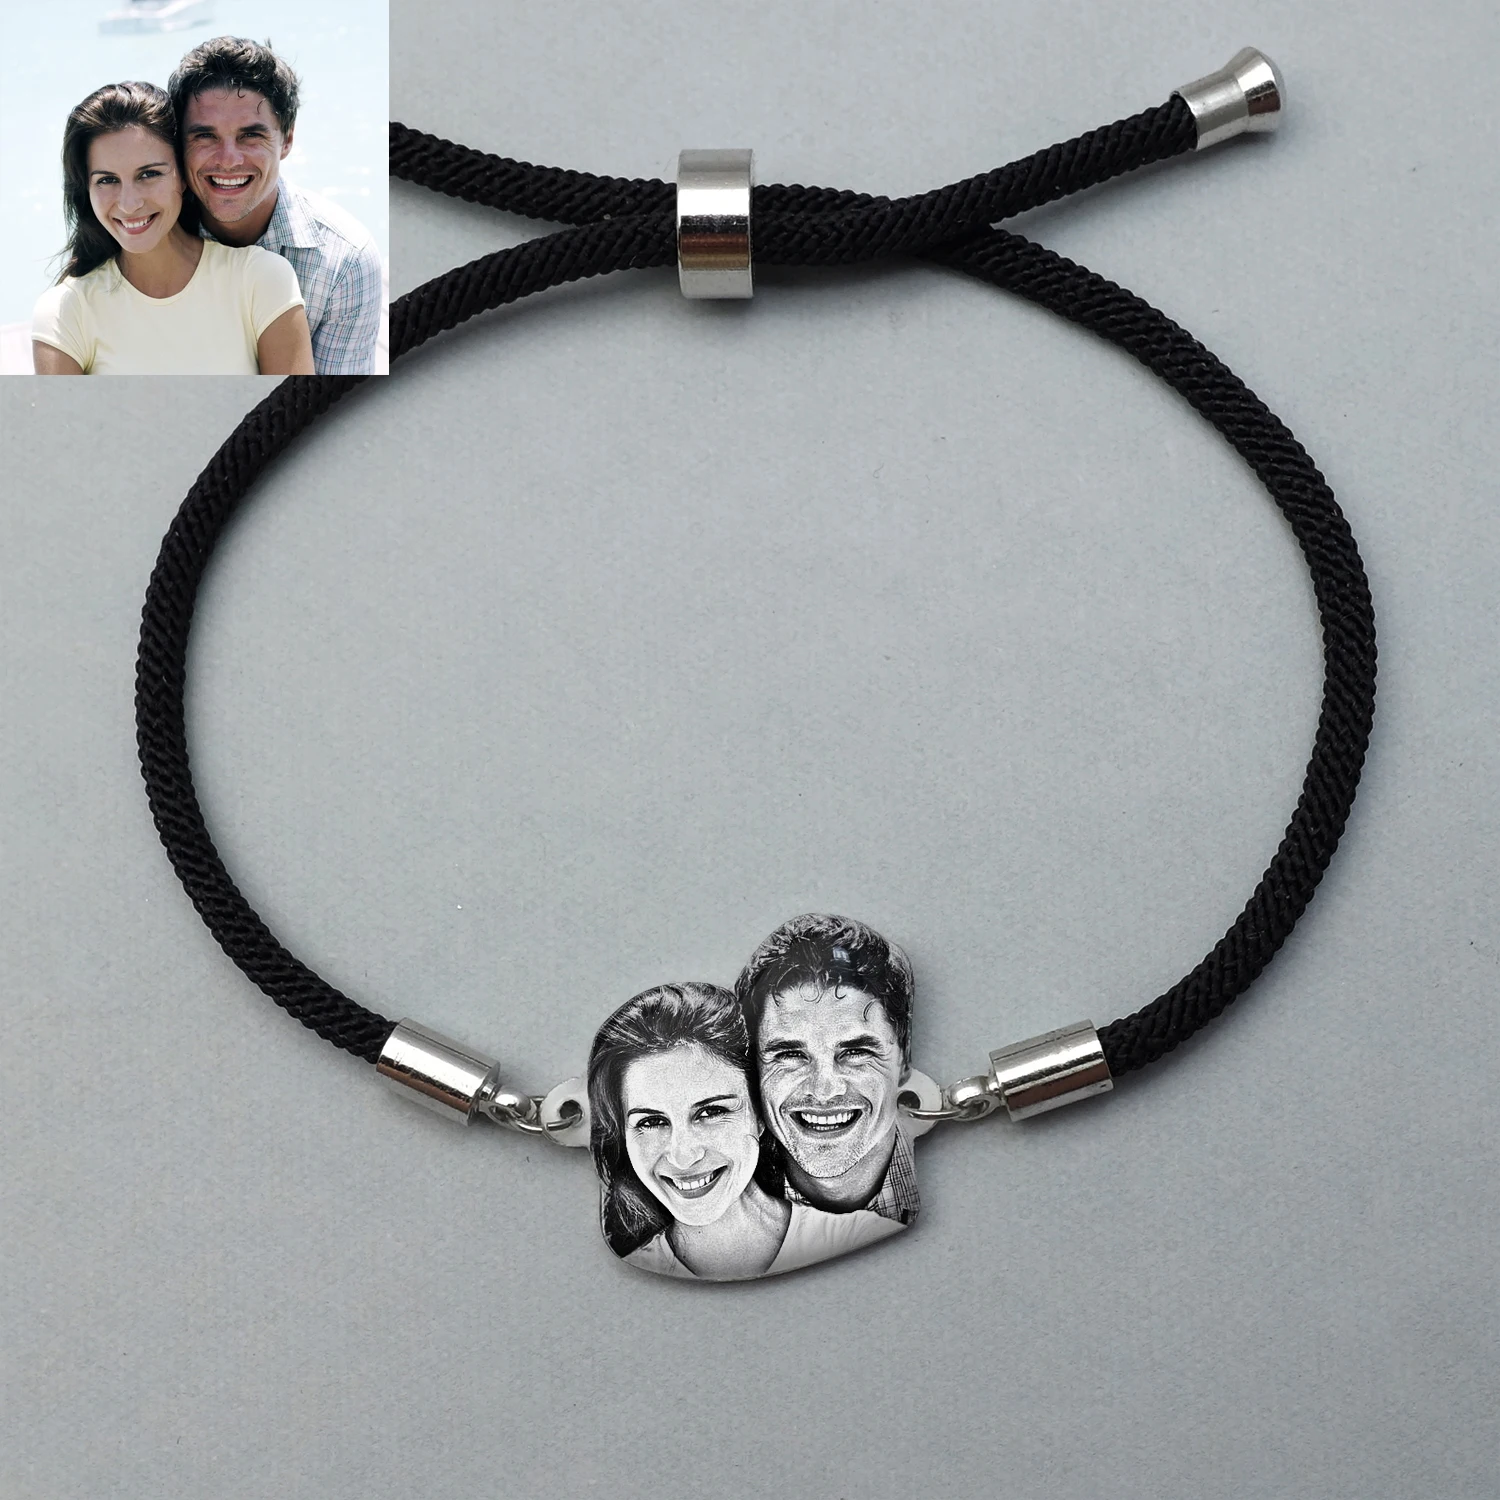 Custom Photo Charm Bracelet Personalized Picture Jewelry Couples Birthday Lover Family Memory Keepsake Christmas Gift for Her 2023 new year s clothes women men matching sweaters christmas family couples jumpers warm thick casual o neck knitwear xmas look